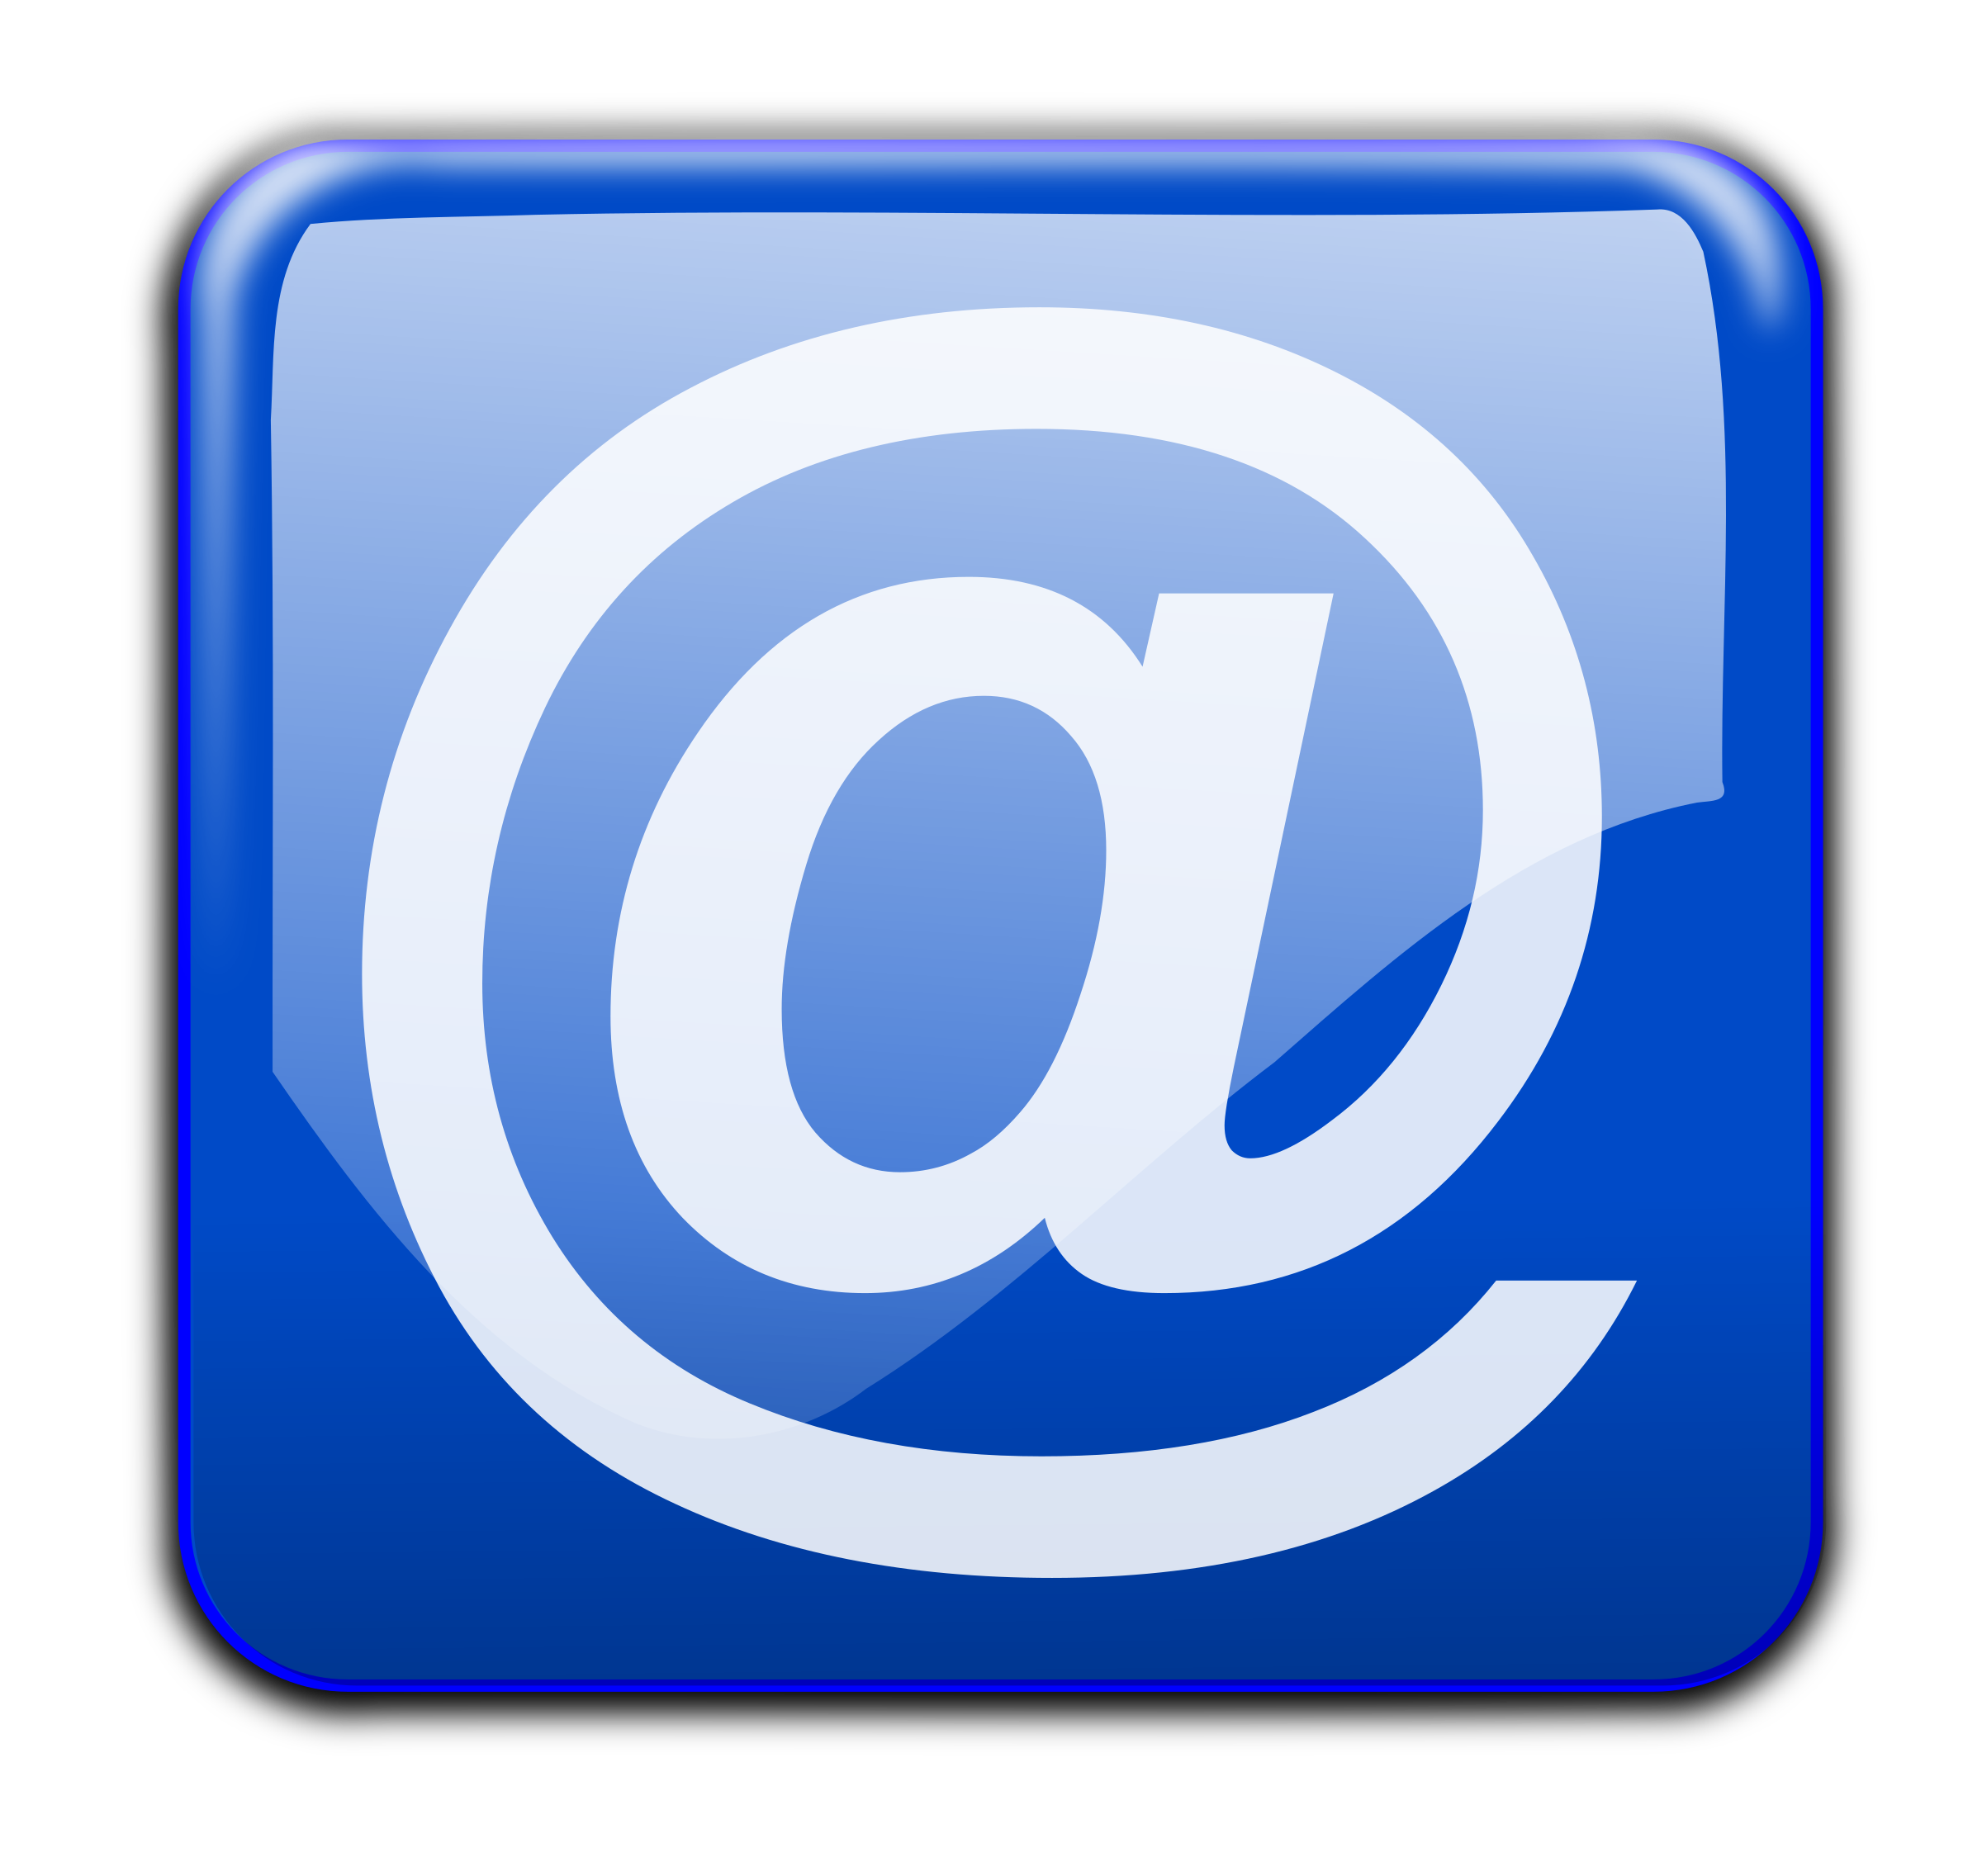 email clipart blue - photo #17